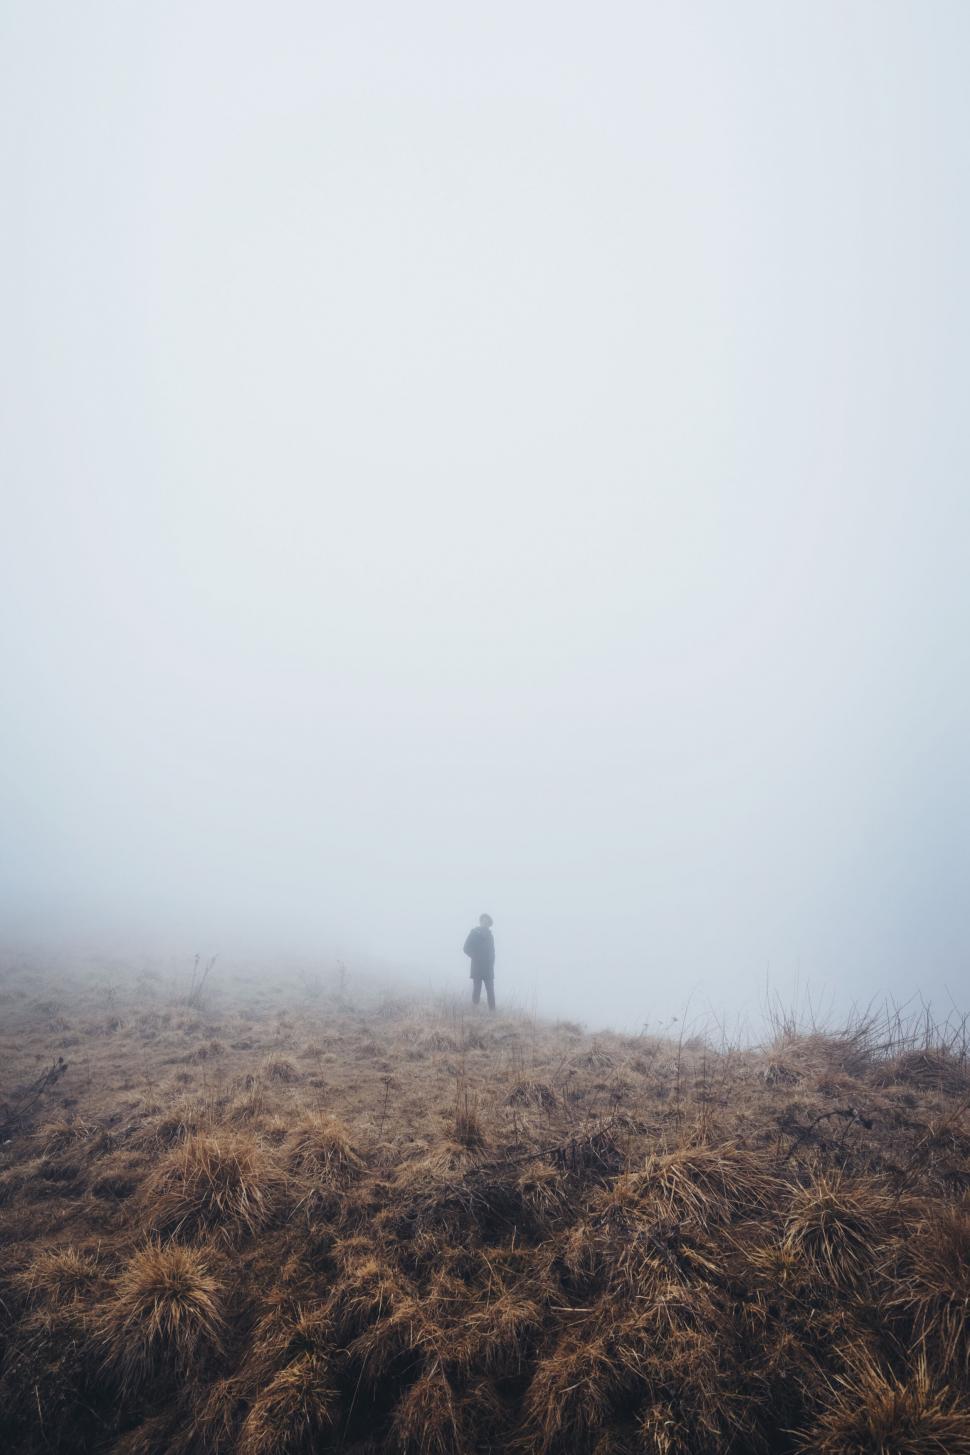 Free Image of A person standing on a hill with fog 